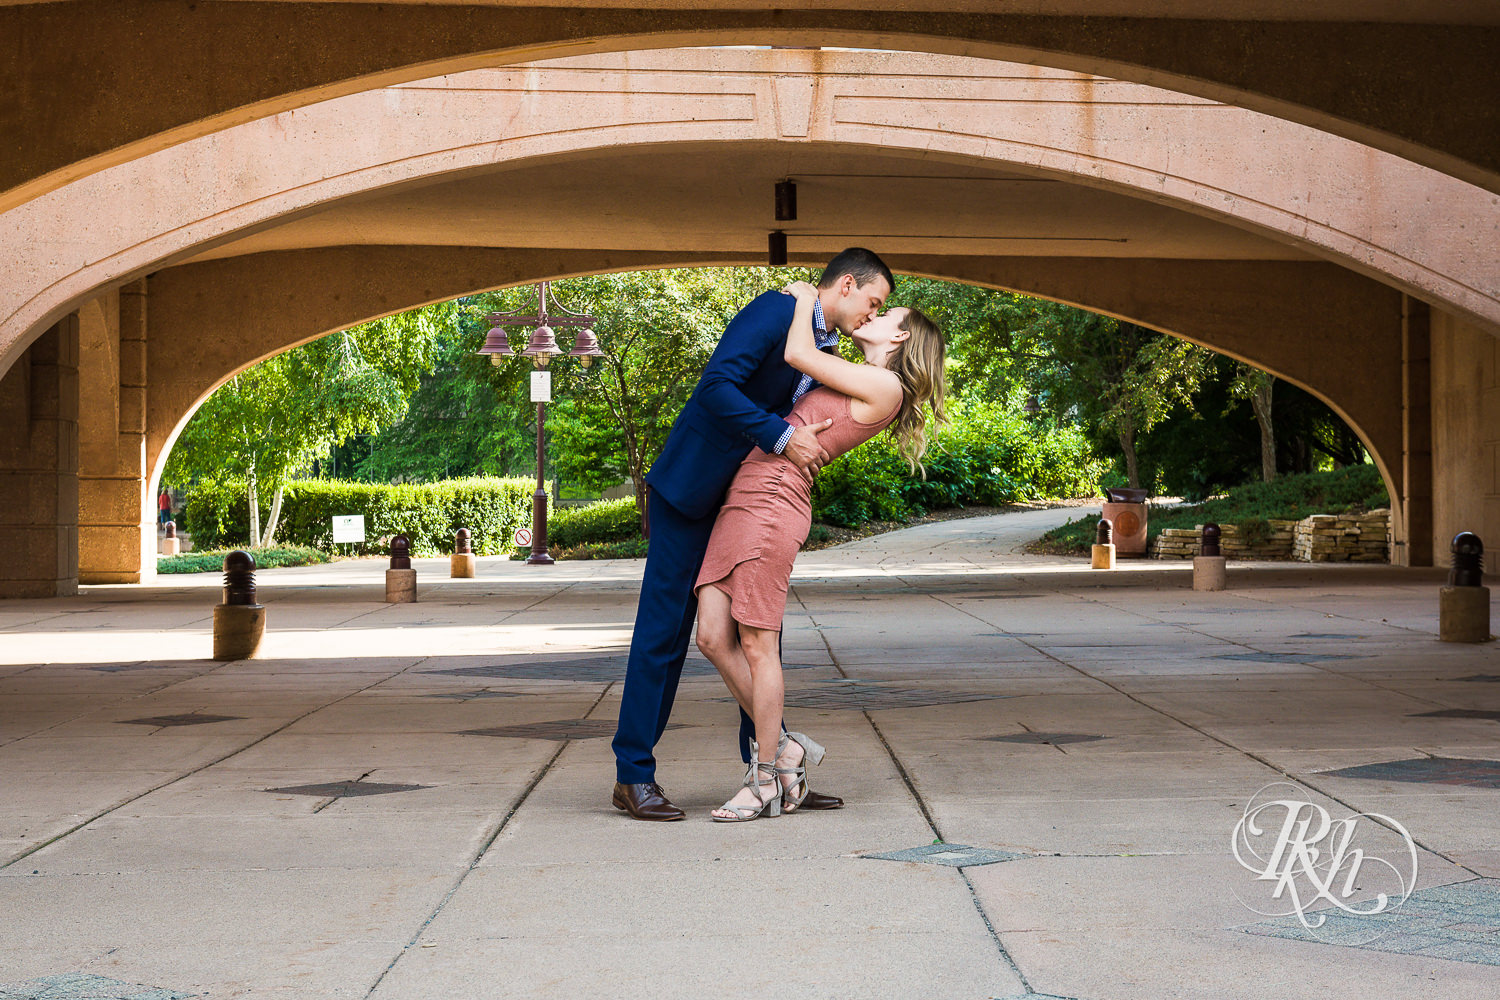 Man in blue suit and woman in pink dress kiss during Centennial Lakes Park engagement photography in Edina, Minnesota.